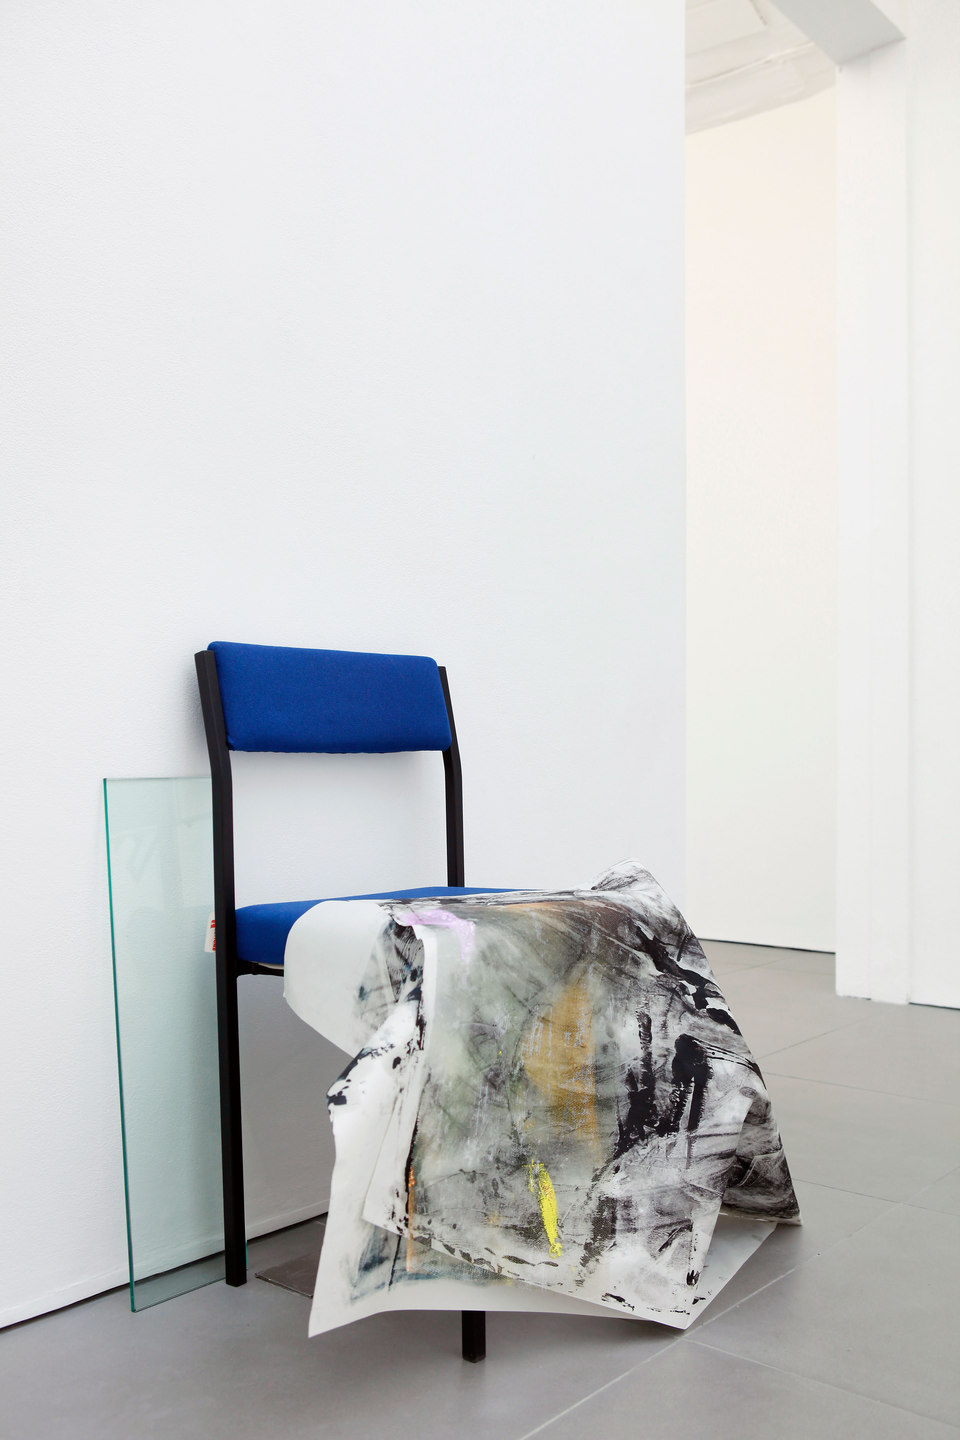 Marianne Spurr, The blue of distance, 2013, lino, metal, emergency blanket, waxed cotton, MDF, cable, oil paint on newsprint, wire, ceramic tiles, clay, ink on acetate, plastic tubing, string, acrylic paint mould, blind, chair, acrylic on gauze, glass